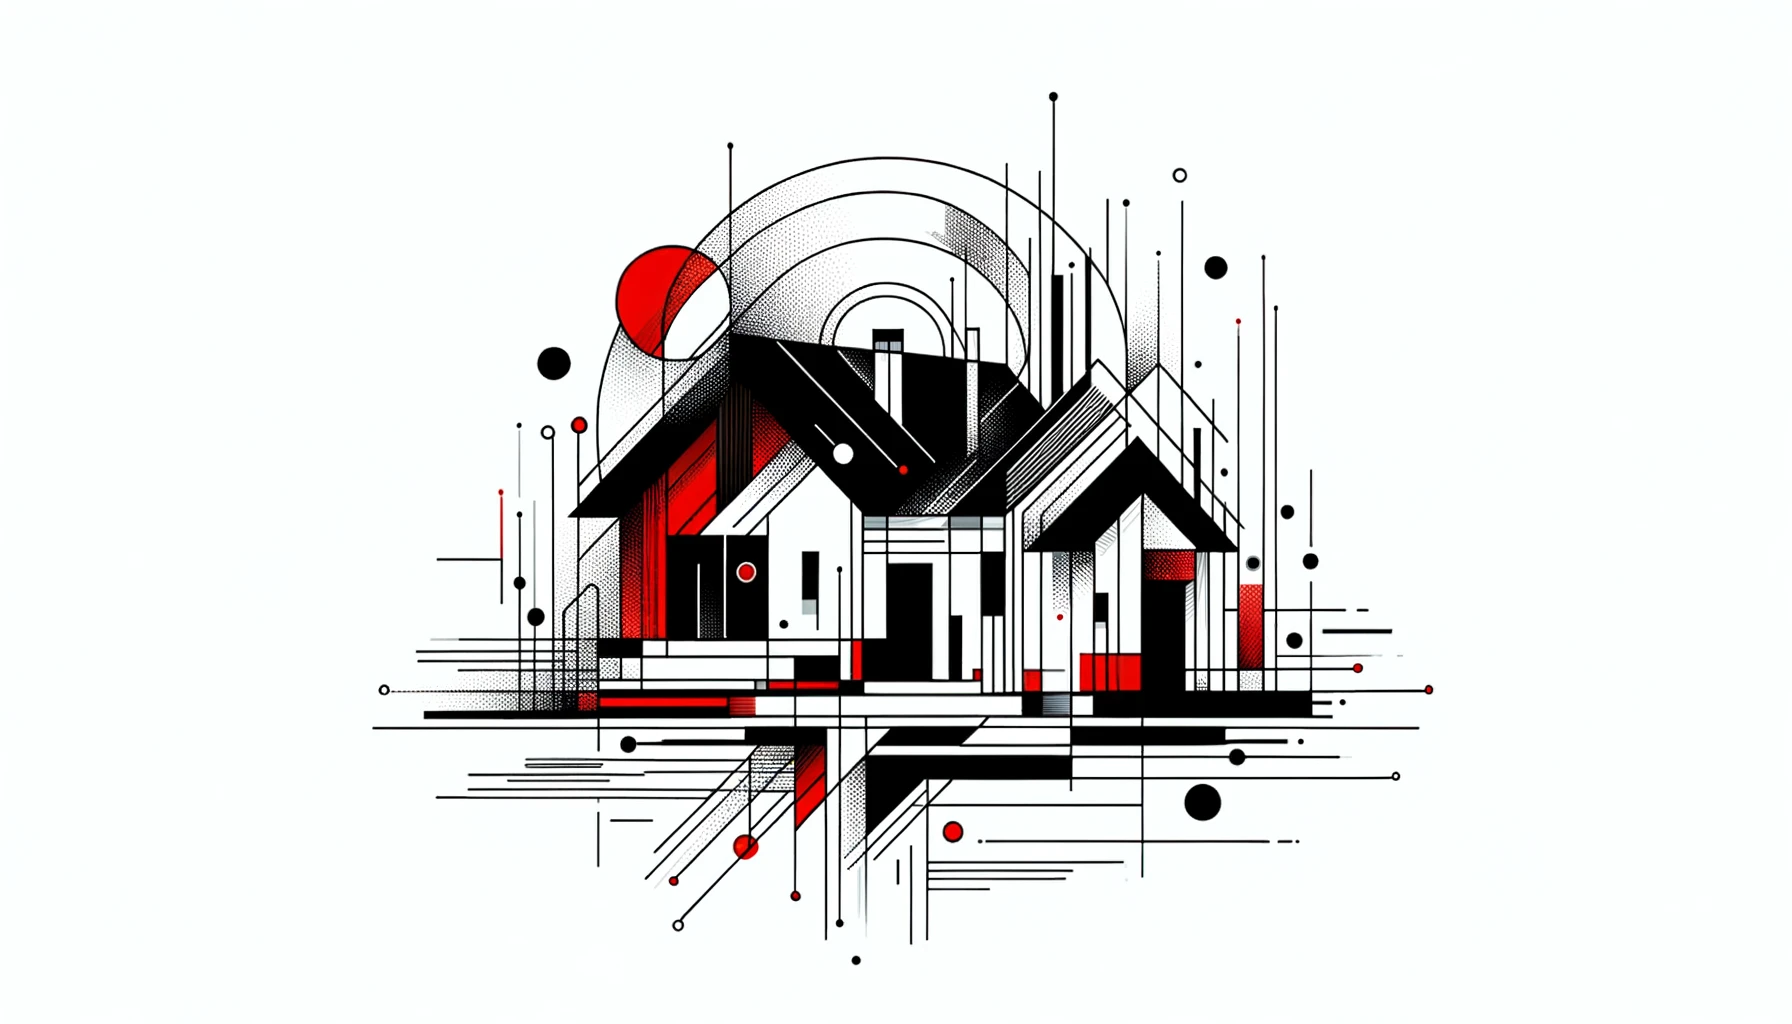 Abstract art of houses for sale featuring geometric shapes and lines in a red and black color scheme.